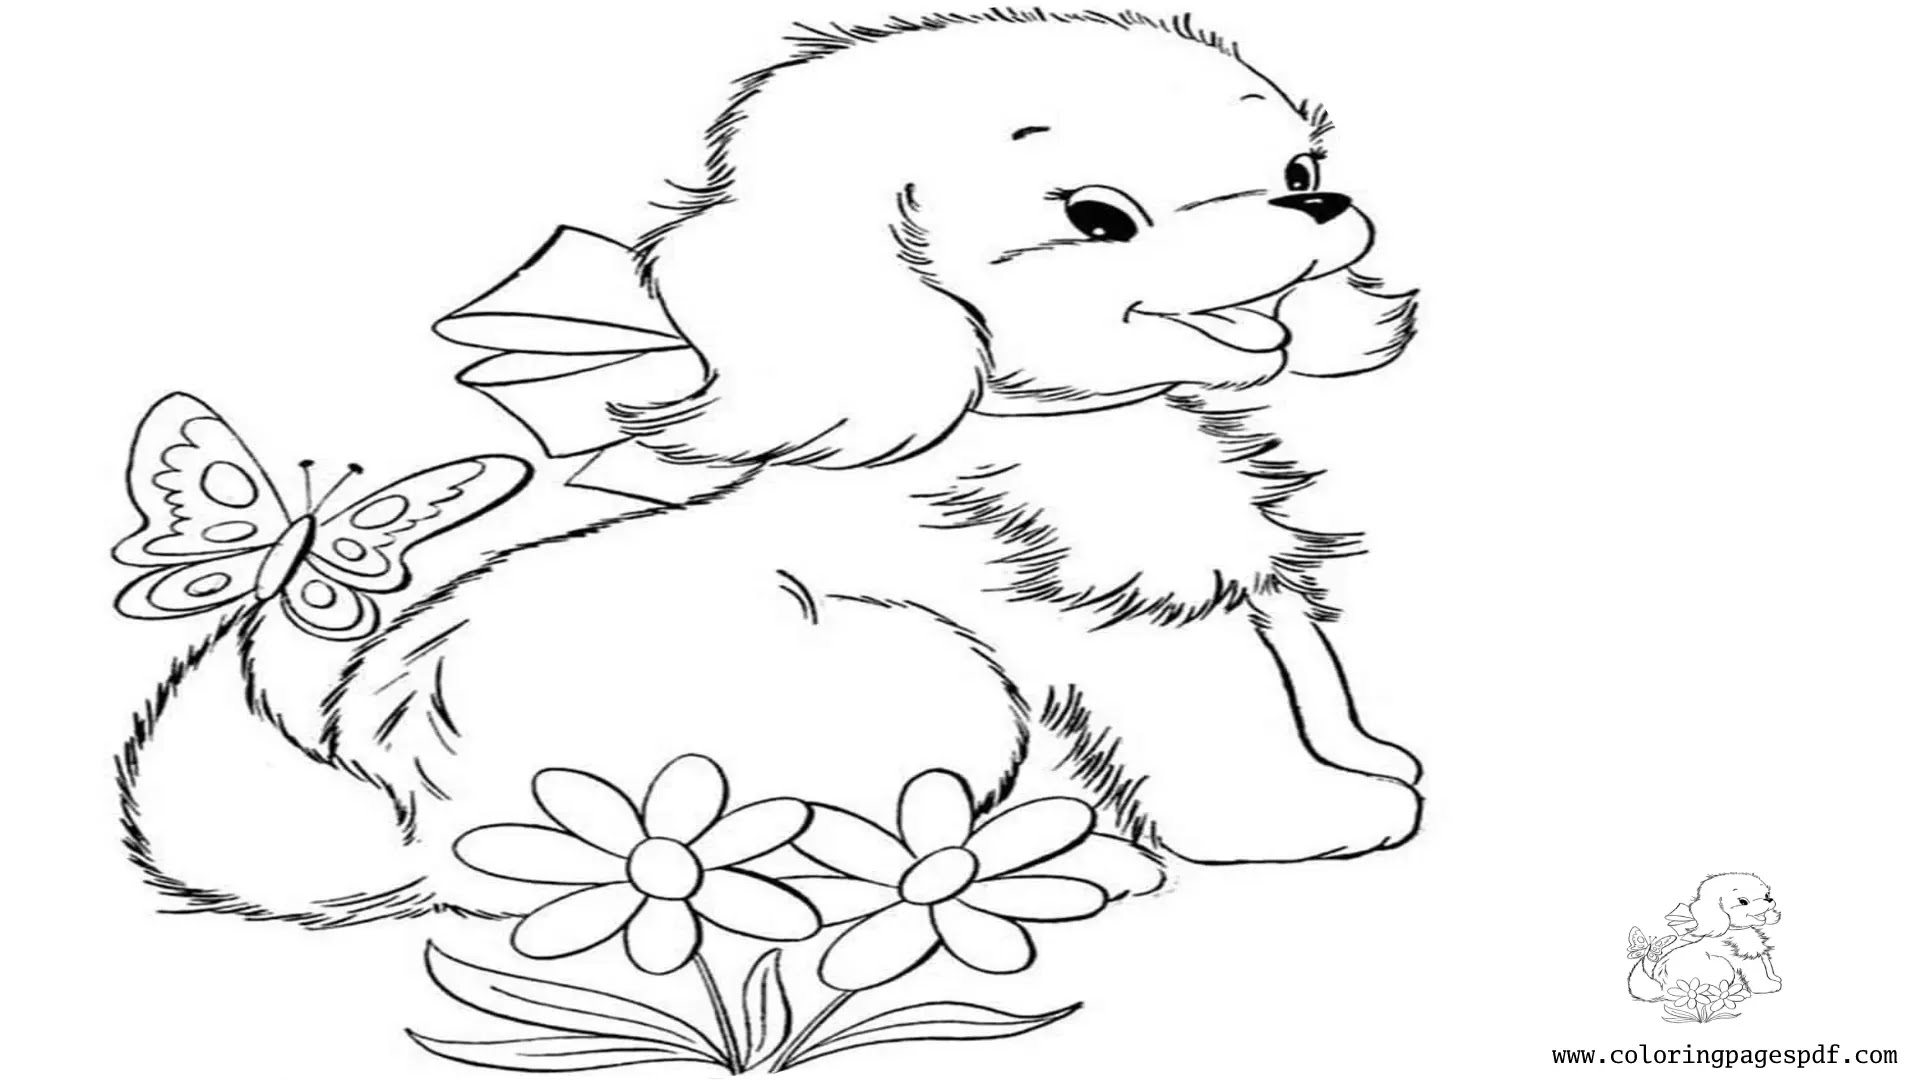 Coloring Pages Of A Puppy With Nice Hair